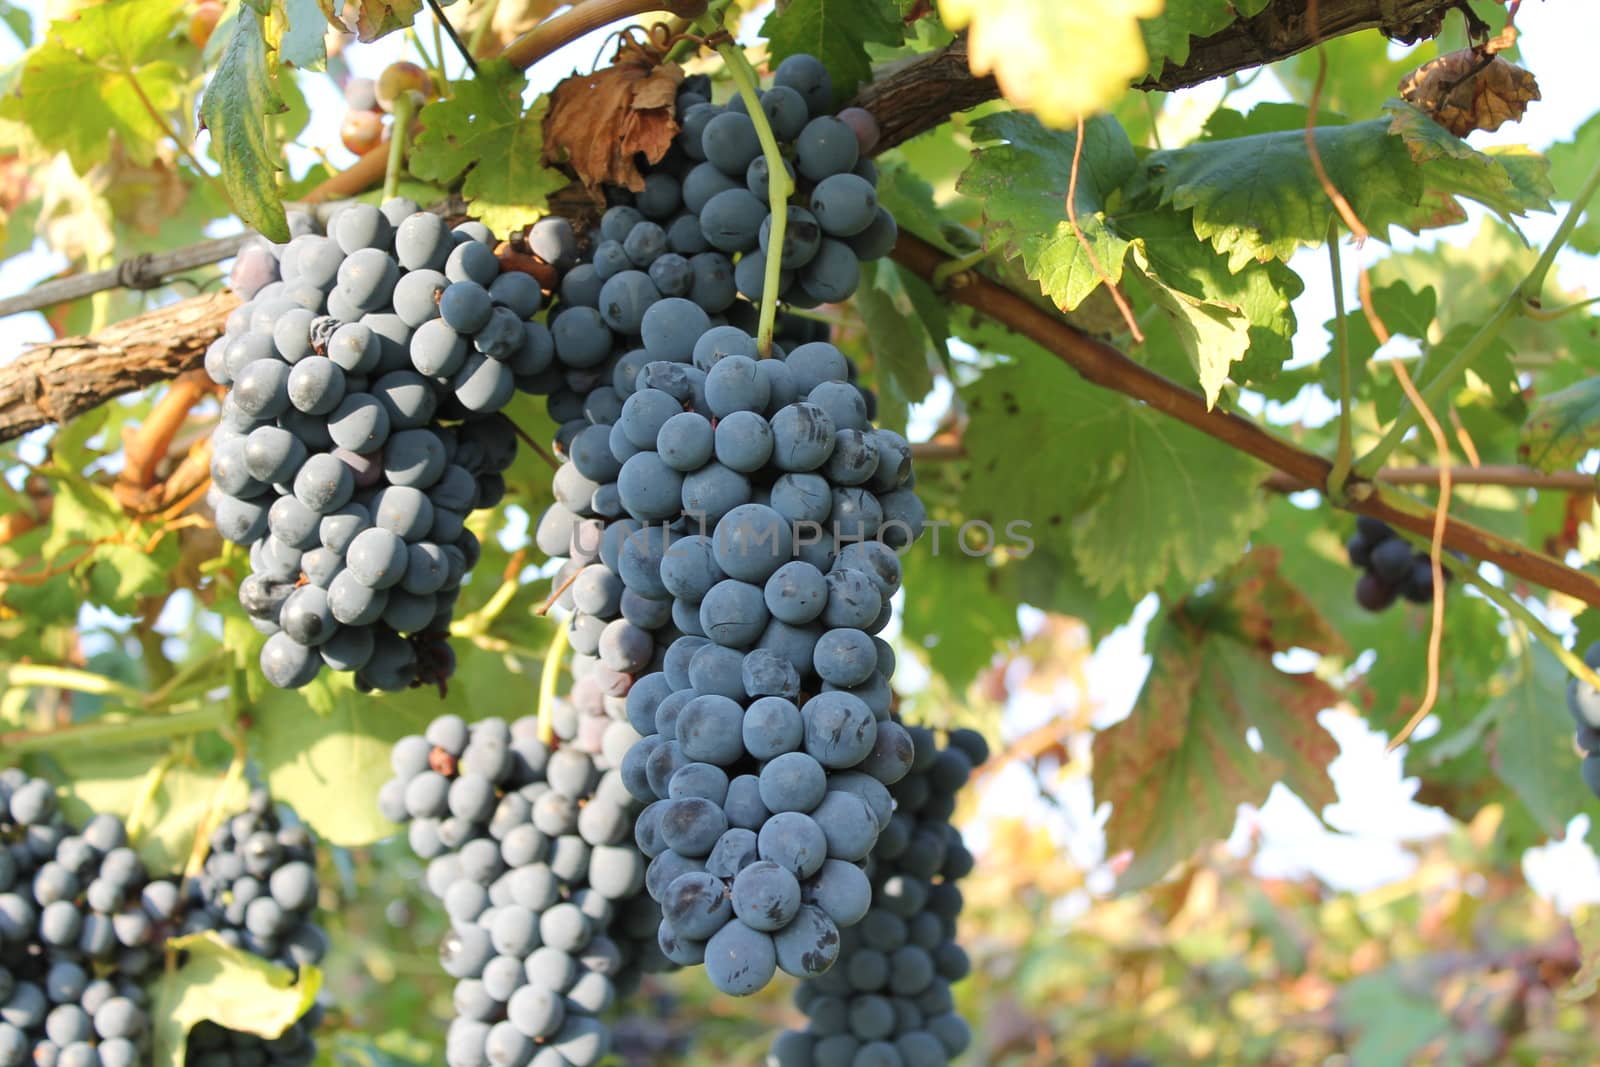 Close up of berries and leaves of grape-vine. Single bunch of ripe red wine grapes hanging on a vine on green leaves background. Plantation of grape-bearing vines, grown for wine making, vinification.